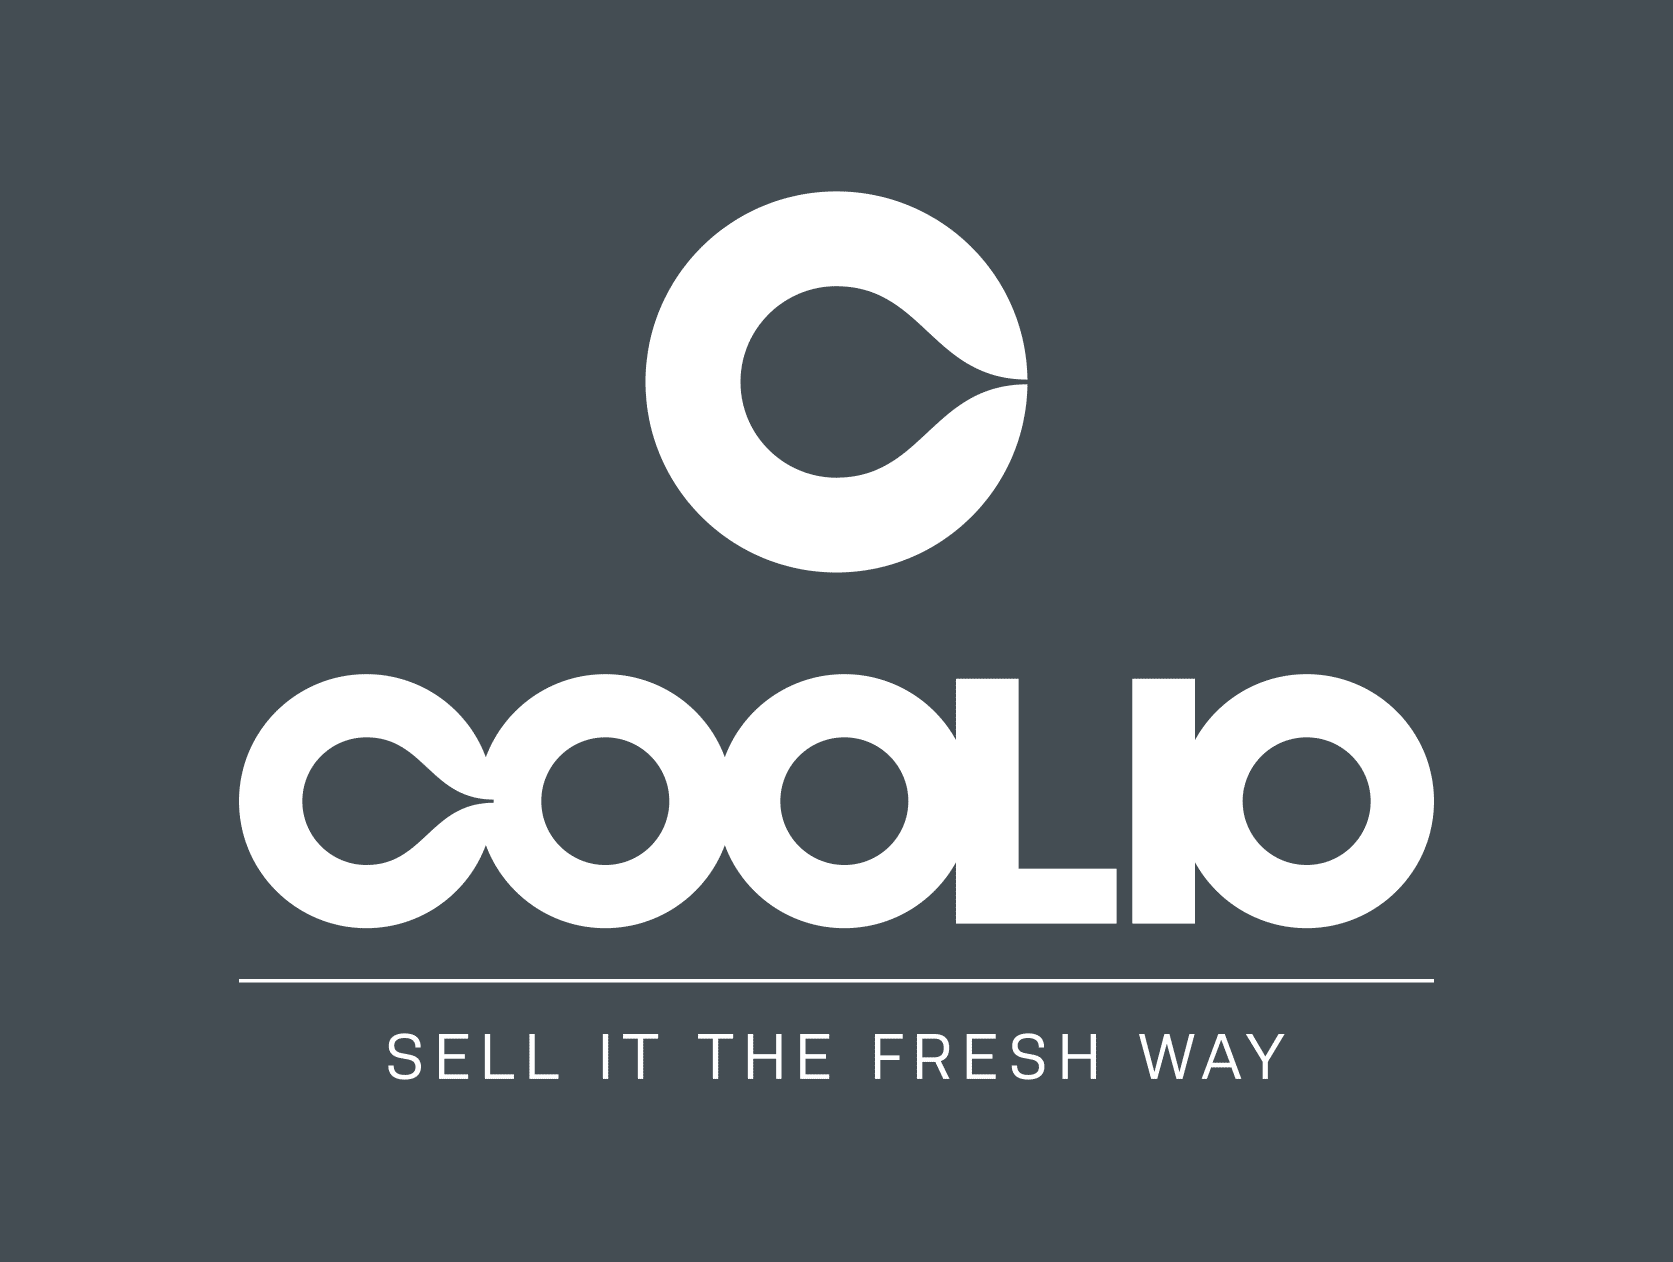 COOLIO - sell it the fresh way